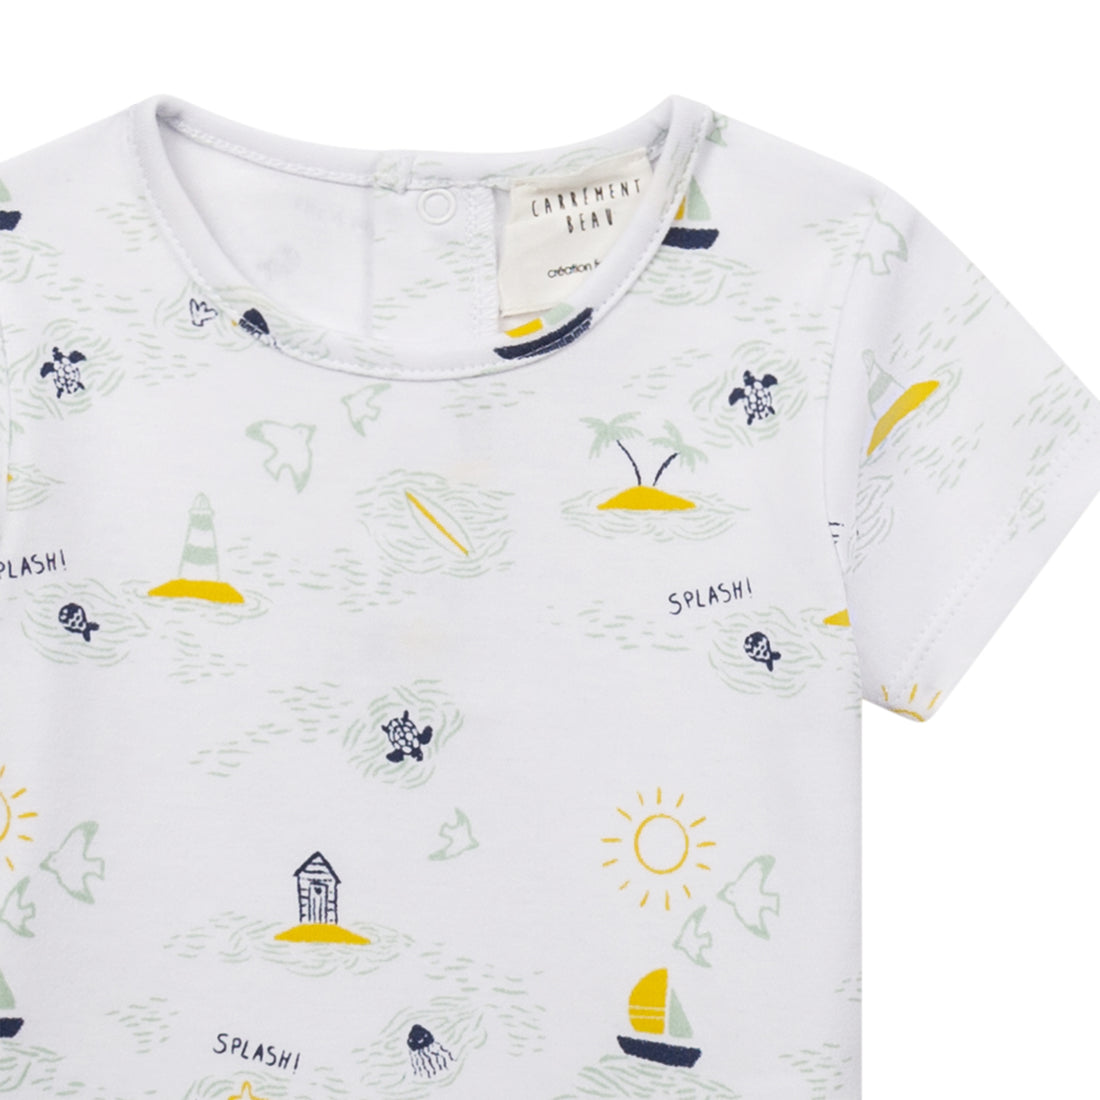 carrément-beau-short-sleeves-tee-shirt-summer-infant-white-carr-s22-y05158-10b-6y- (2)